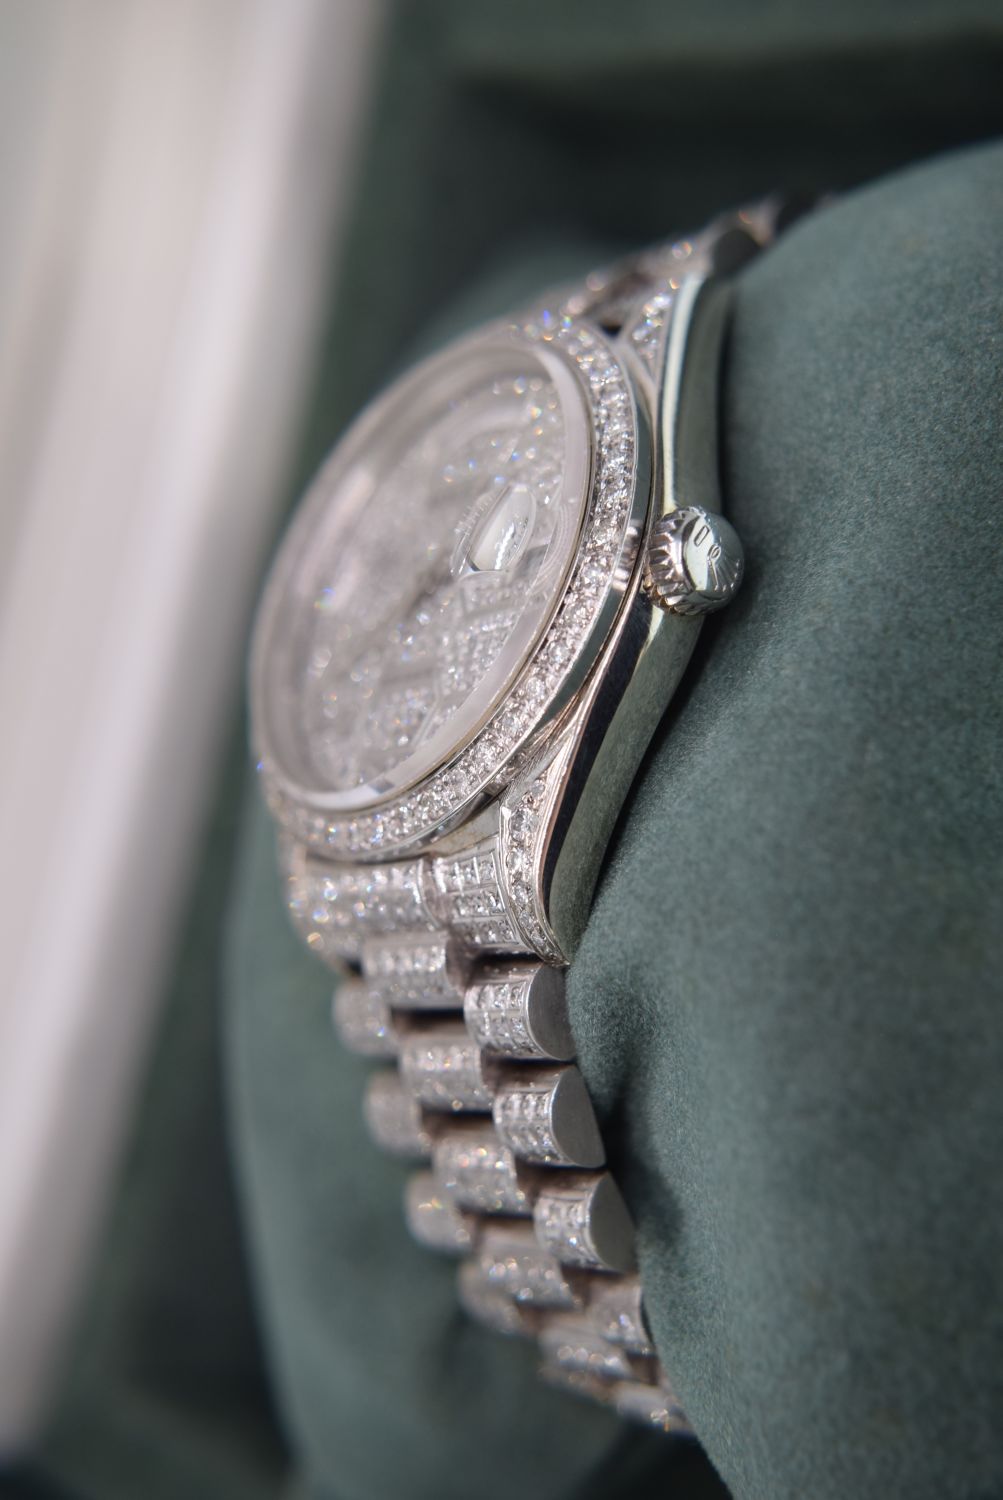 WATCH MARKED ROLEX DAY DATE (DIAMOND ENCRUSTED) MO - Image 9 of 13